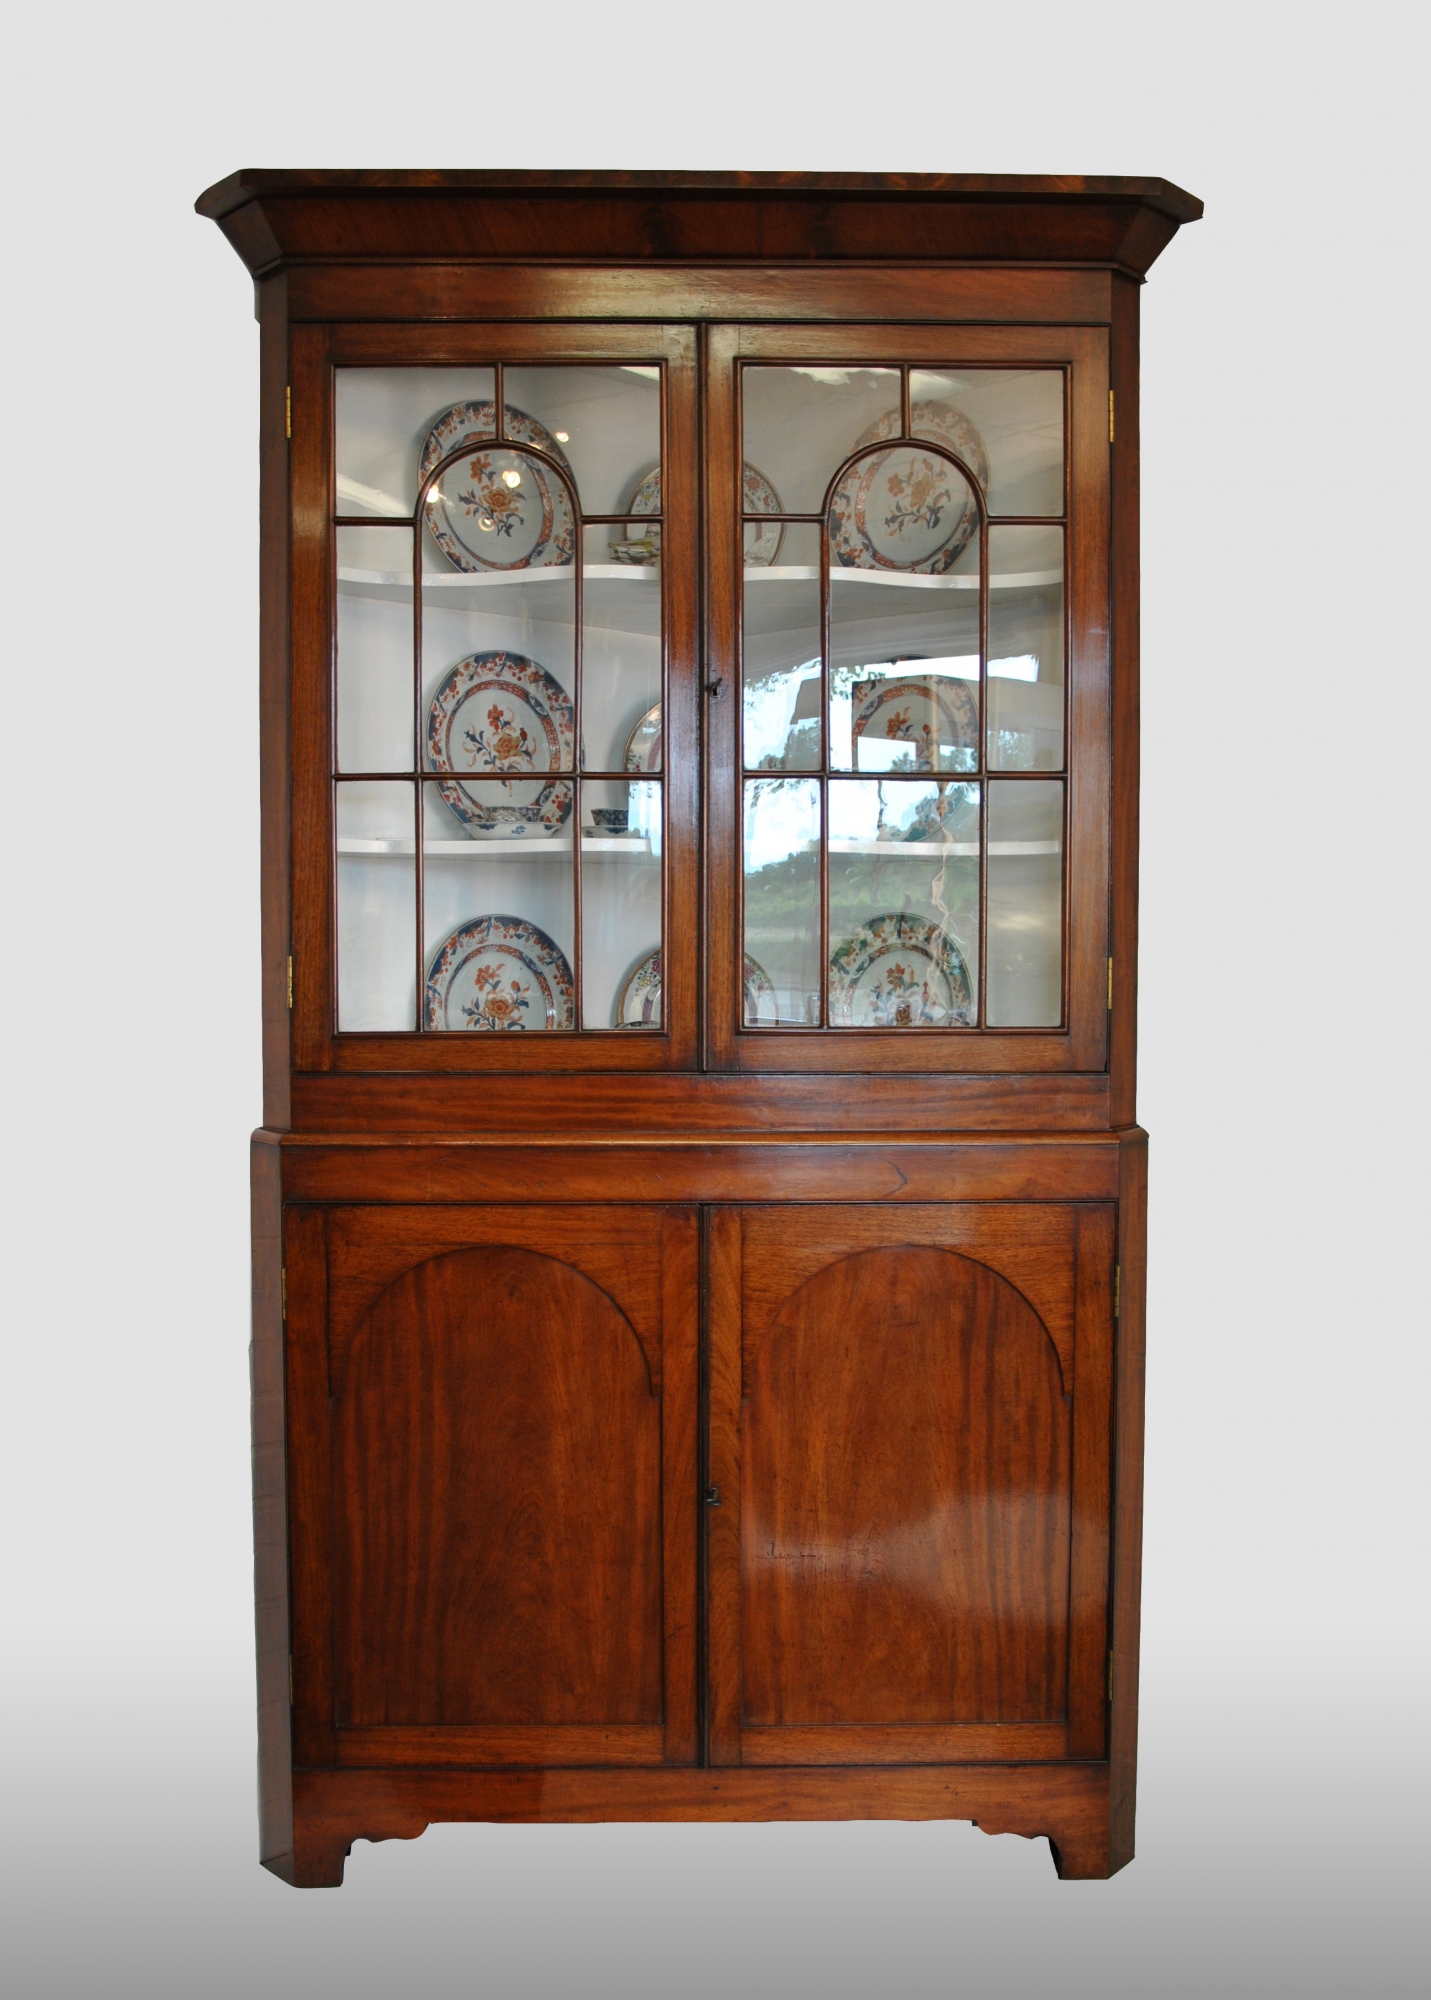 English Corner Display Cabinet With The Original Glass In The